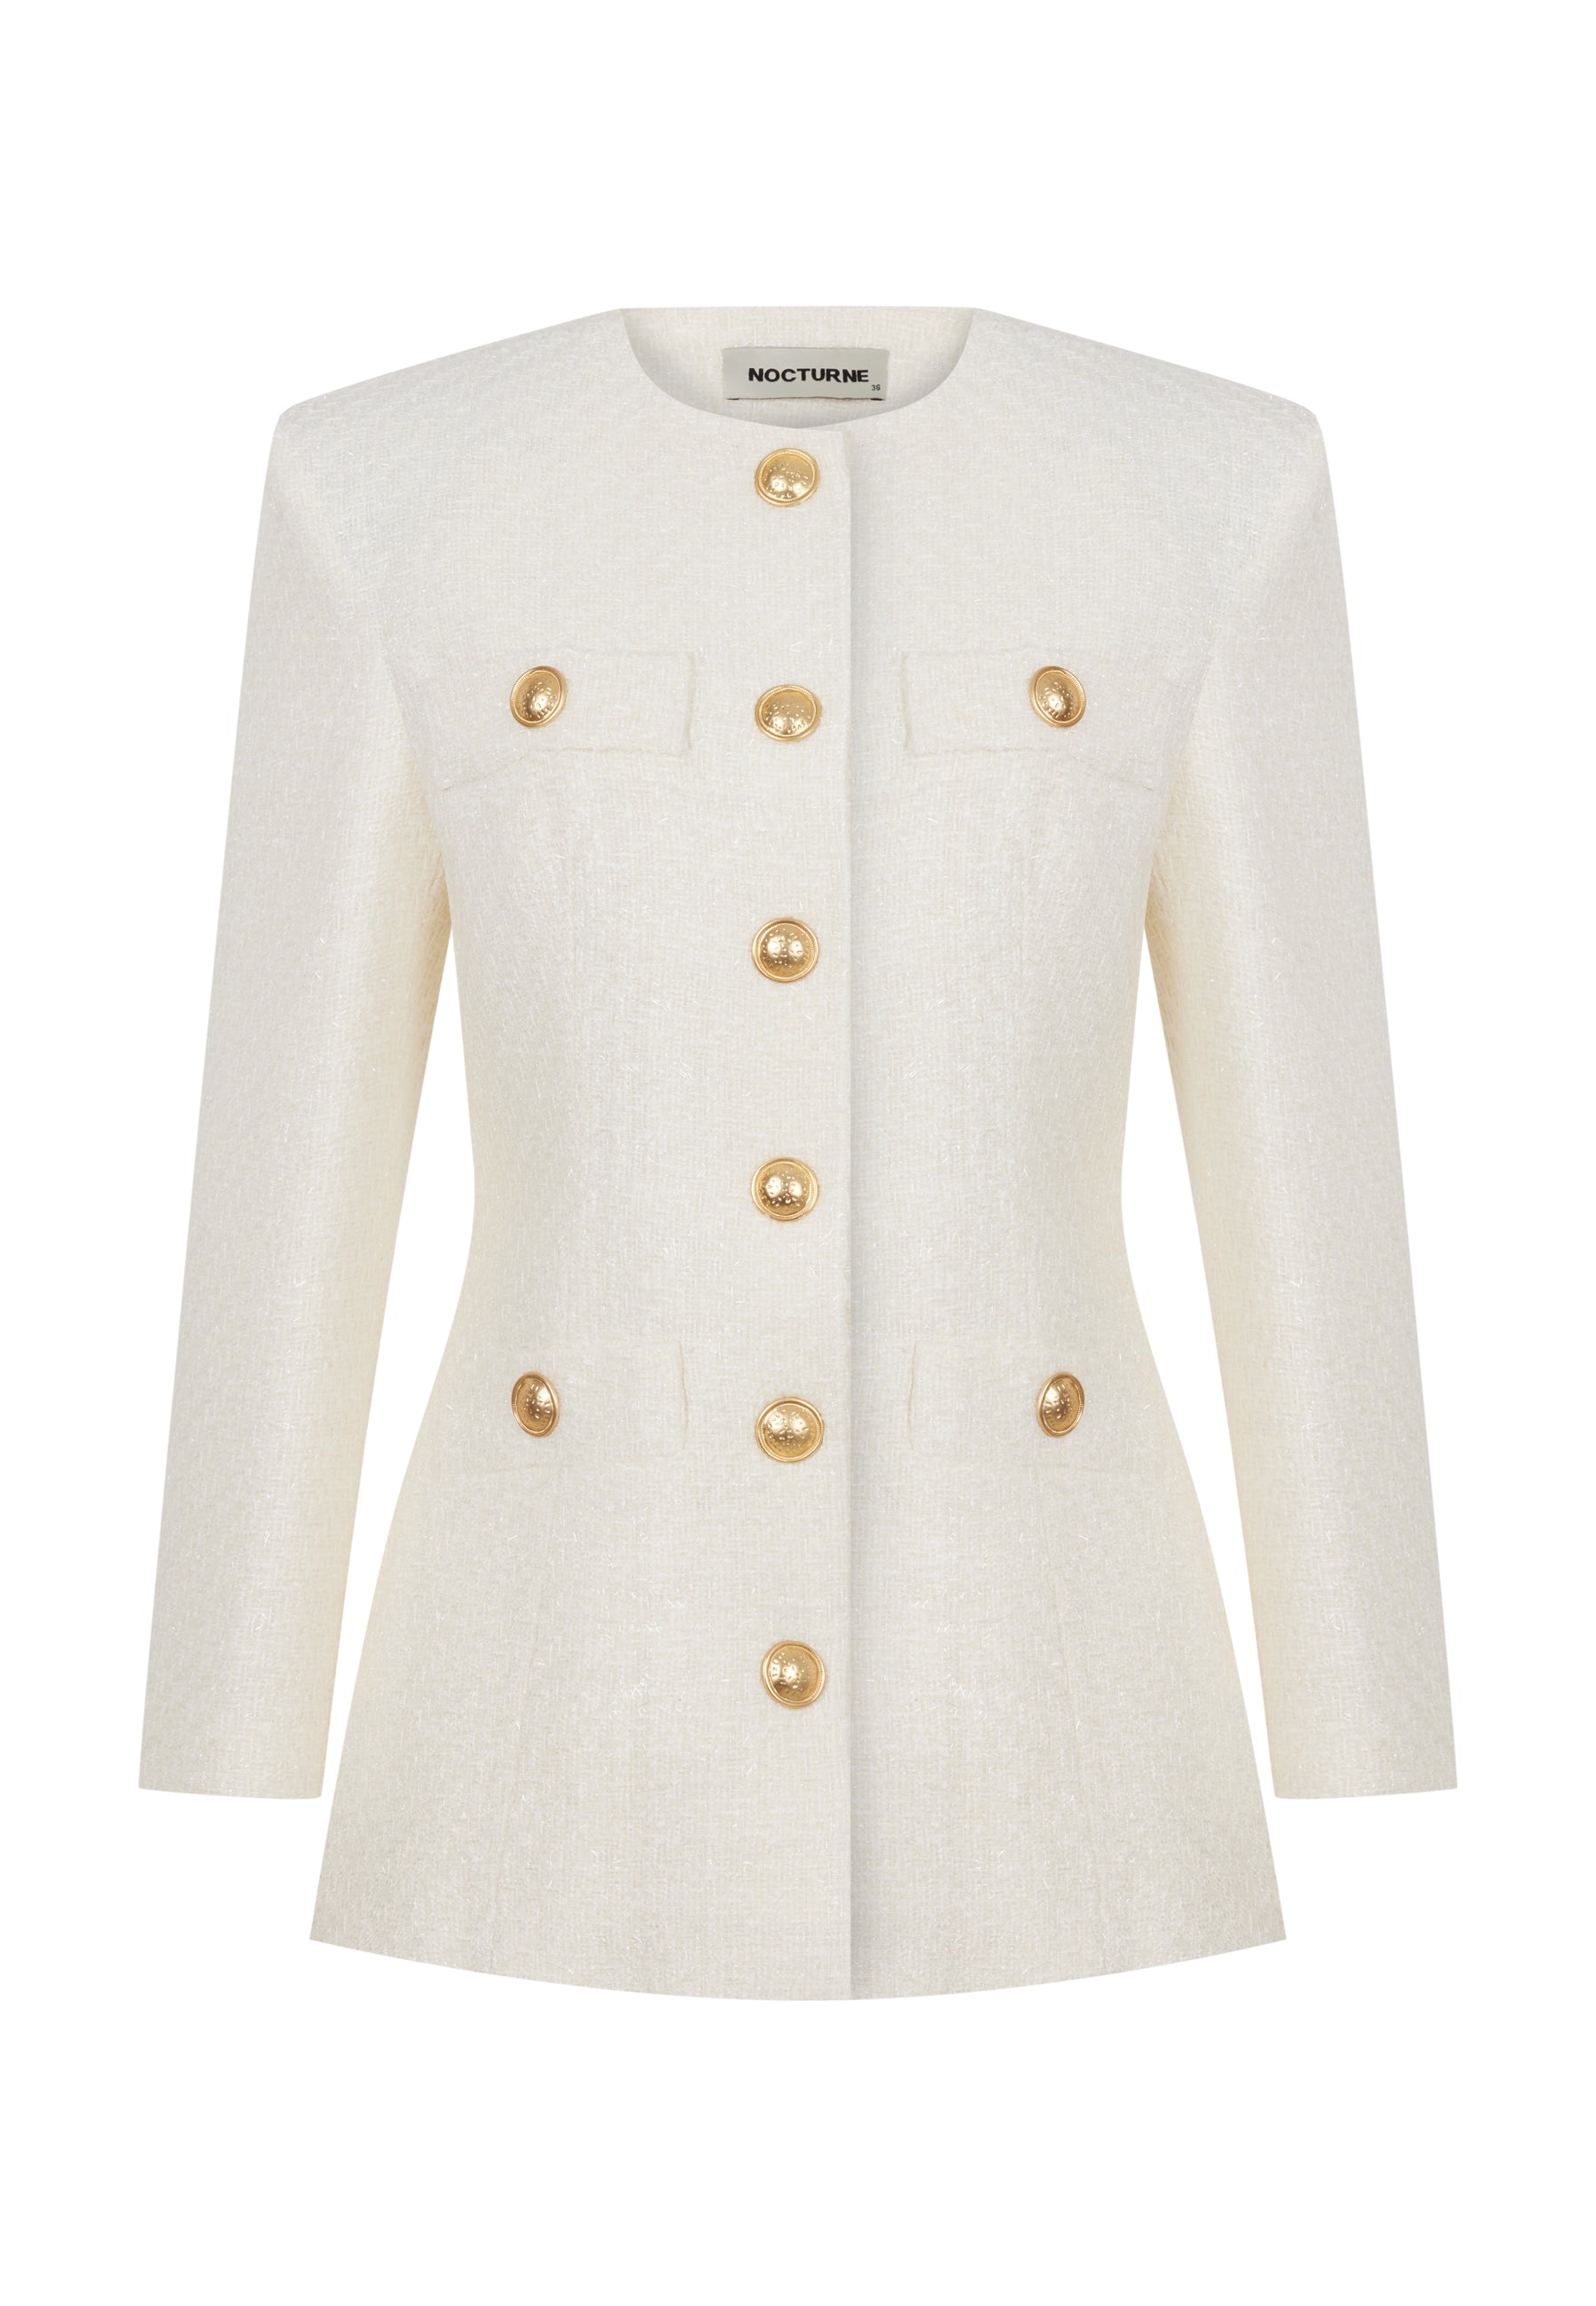 Nocturne Women's White Tweed Jacket With Button Detail